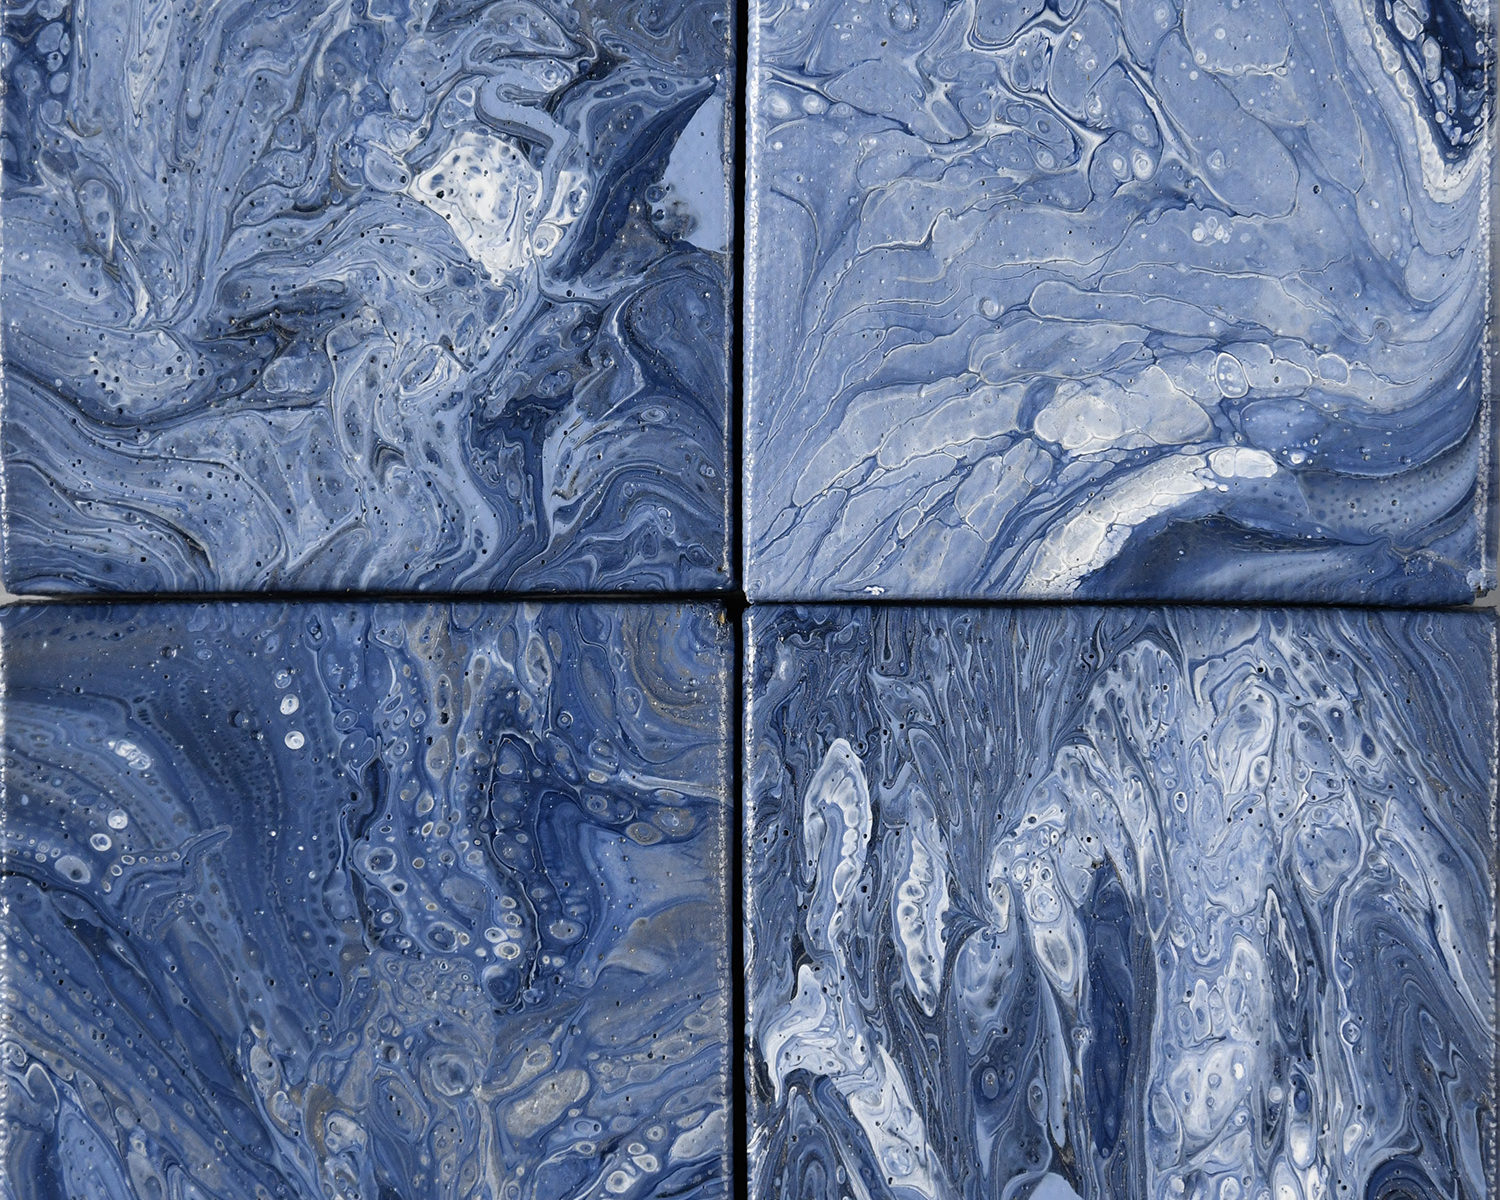 acrylic pour on canvas (2018), set of four, each canvas is 3"x3" study in blue, with hints of silver and greys